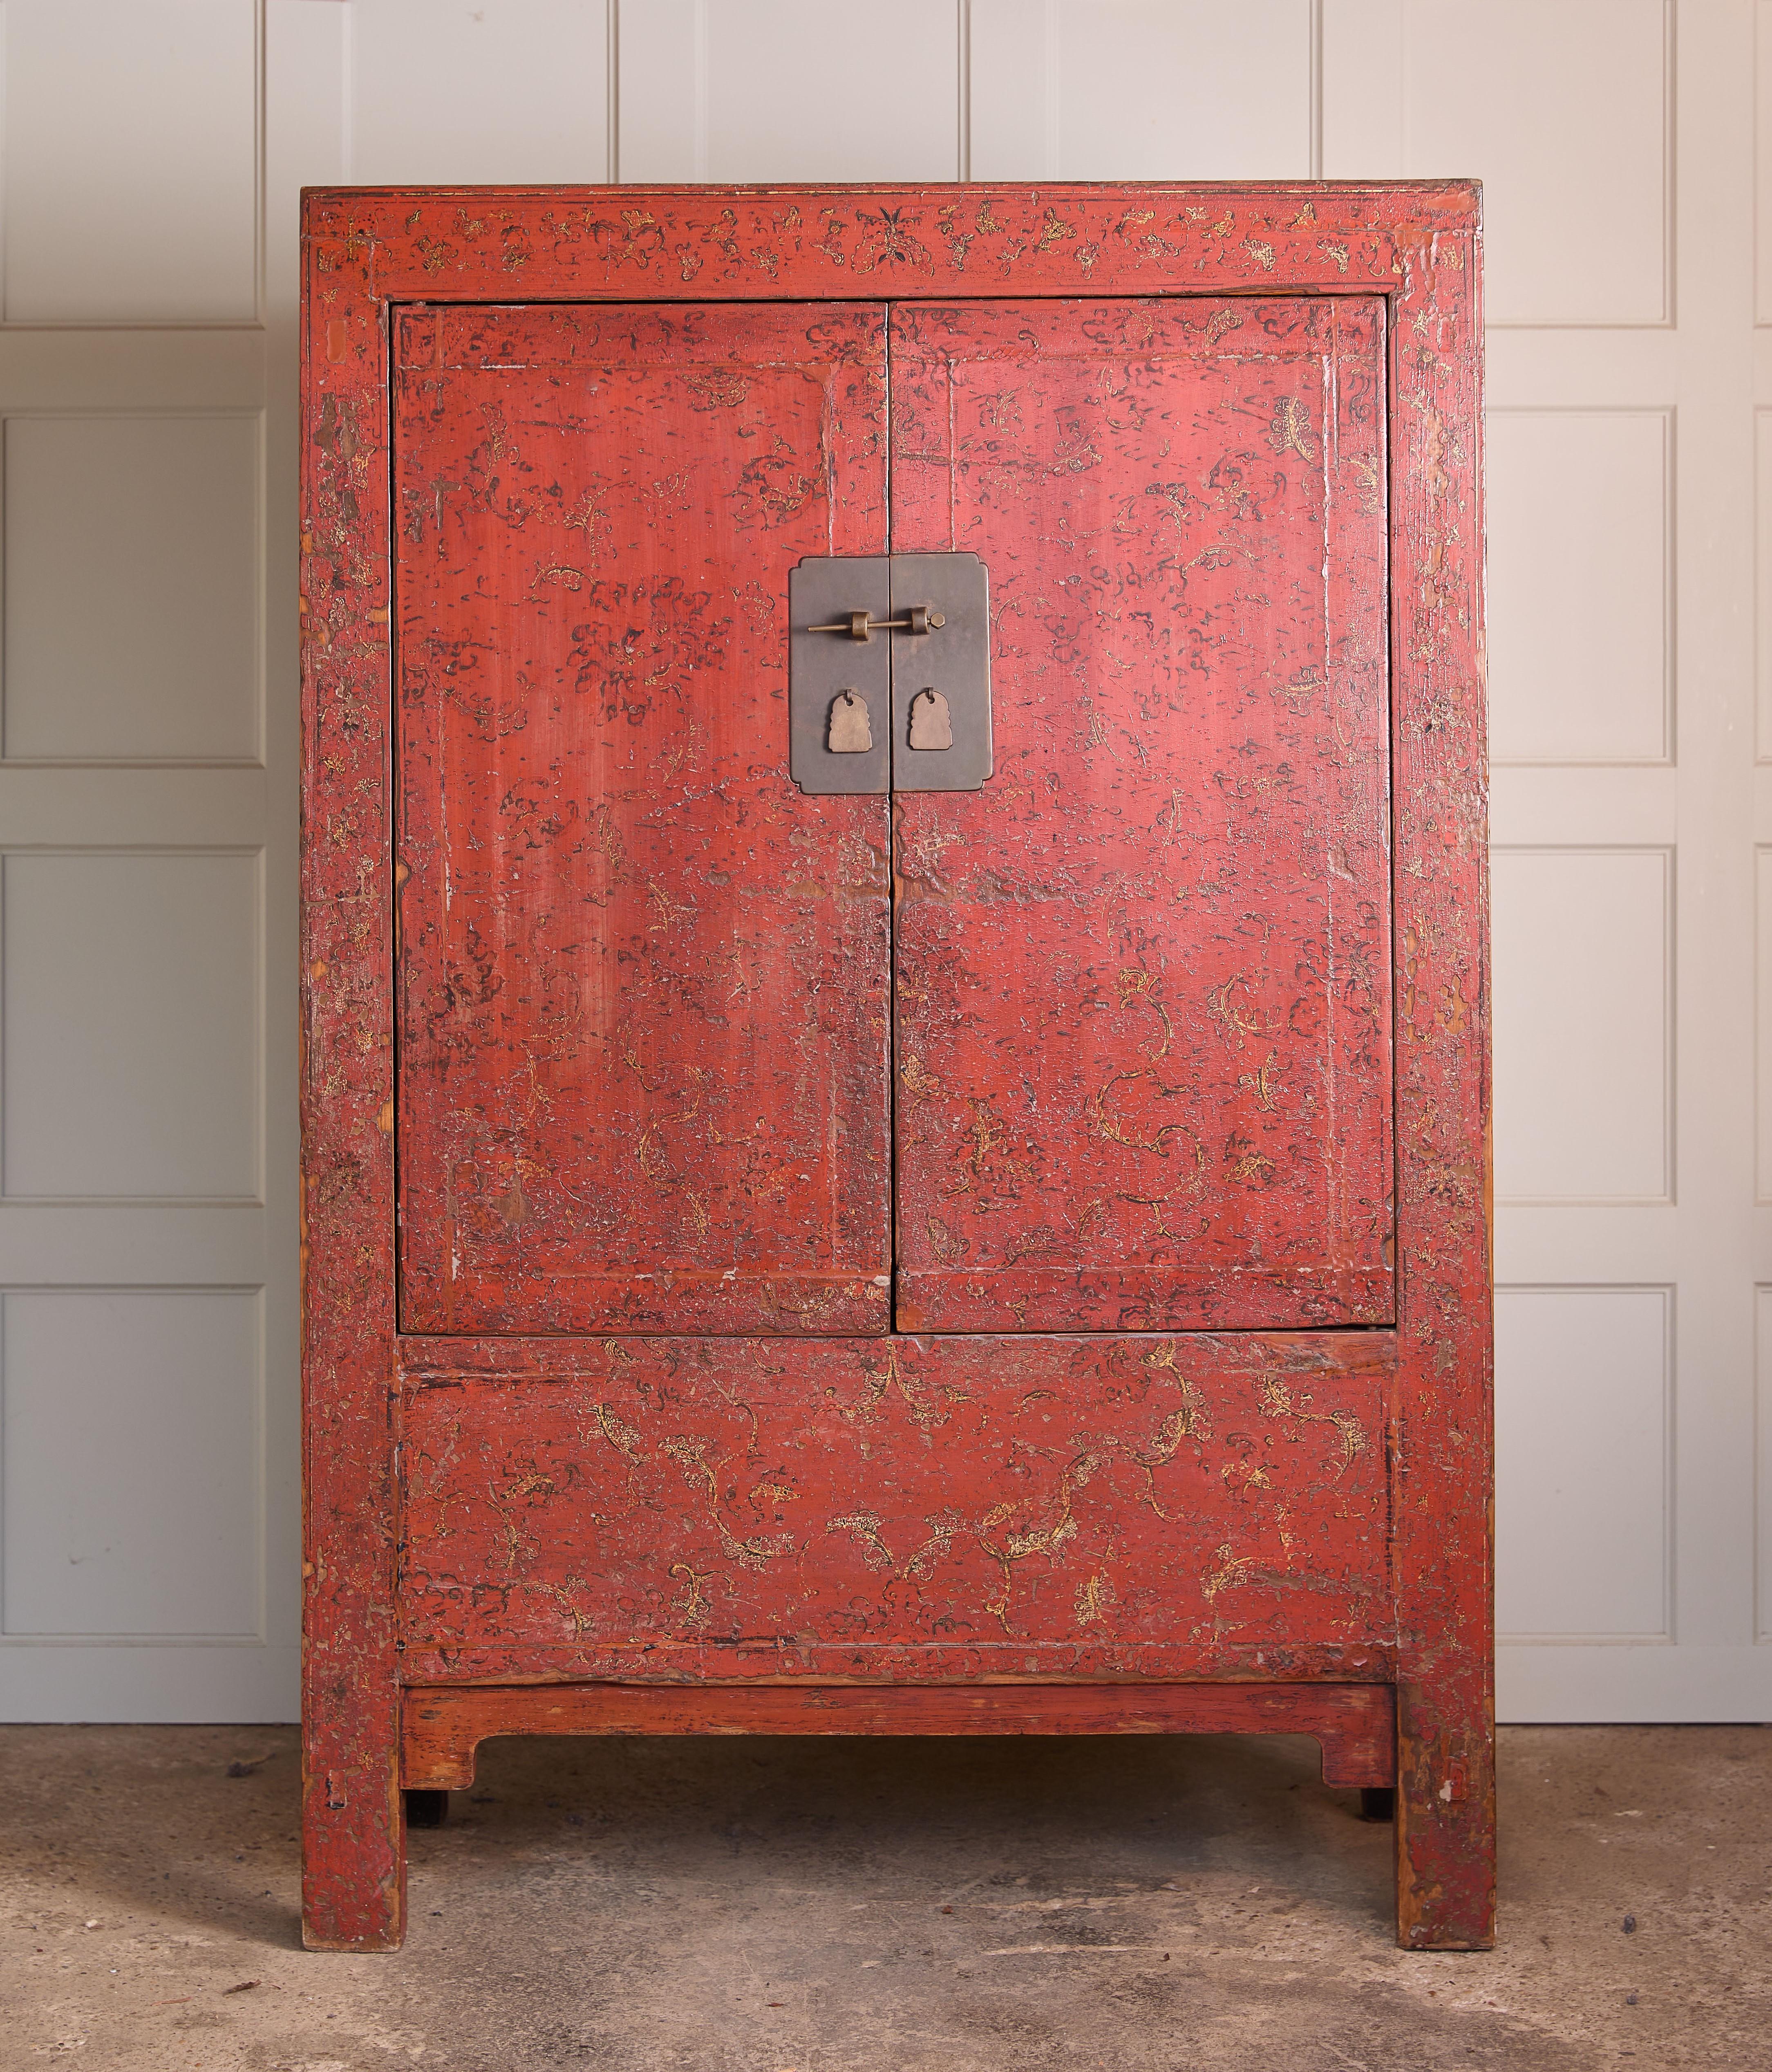 A Chinese red lacquered marriage cabinet, likely from the 18th or 19th century. The doors are decorated with foliate detail, and open to reveal a hanging rail running the whole width. With original brass handles, and finished in traditional red